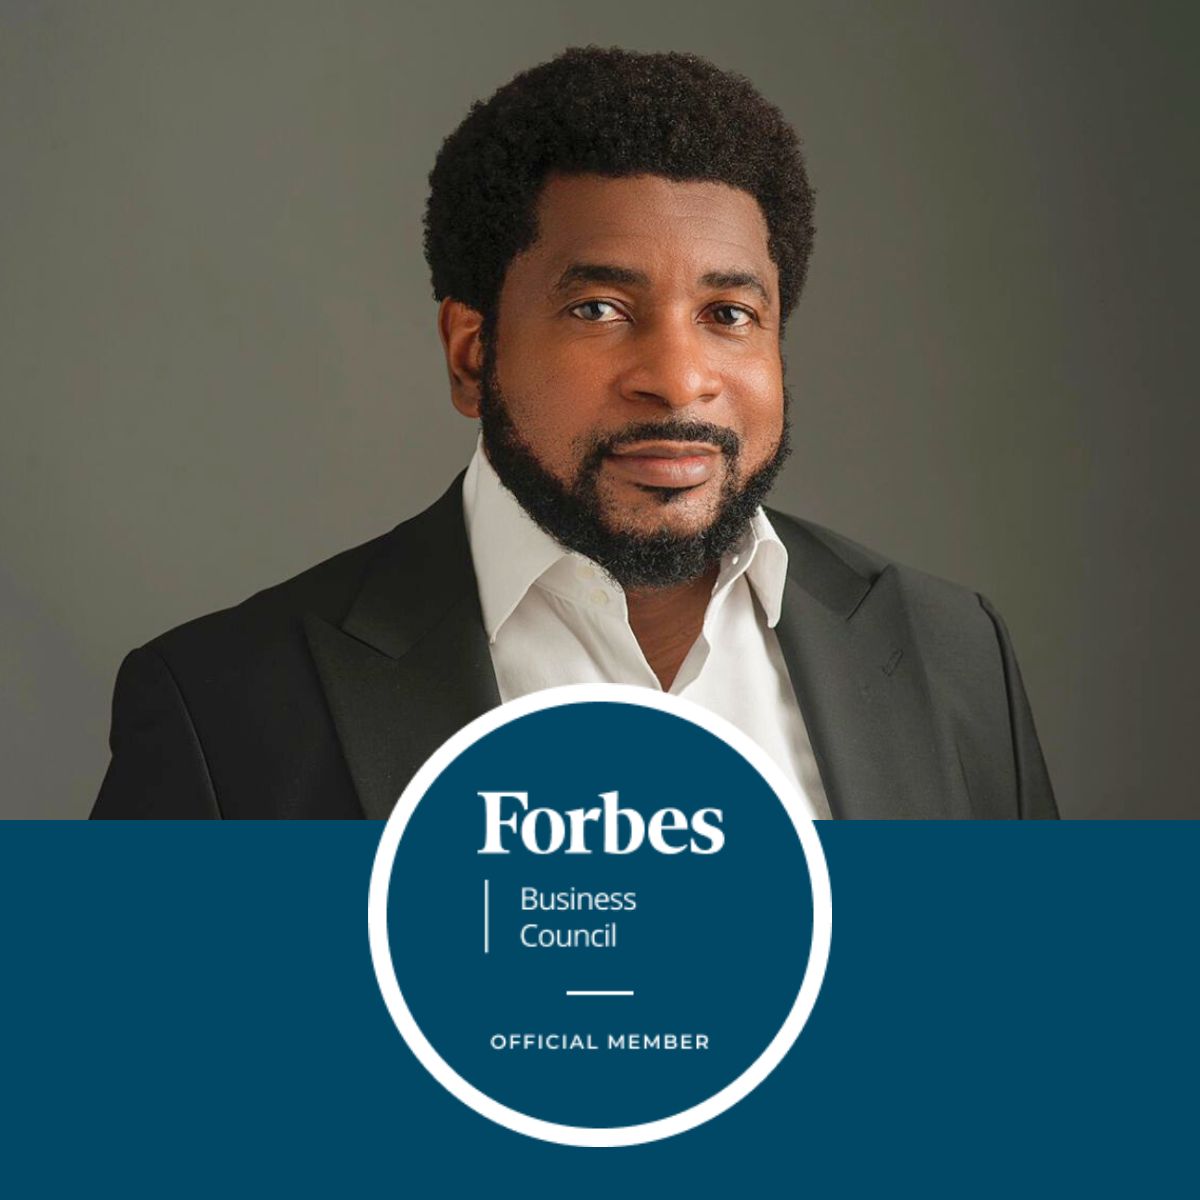 Dr. Kingsley Okonkwo: Advancing Relationships Globally through Expertise and Forbes Business Council Membership.